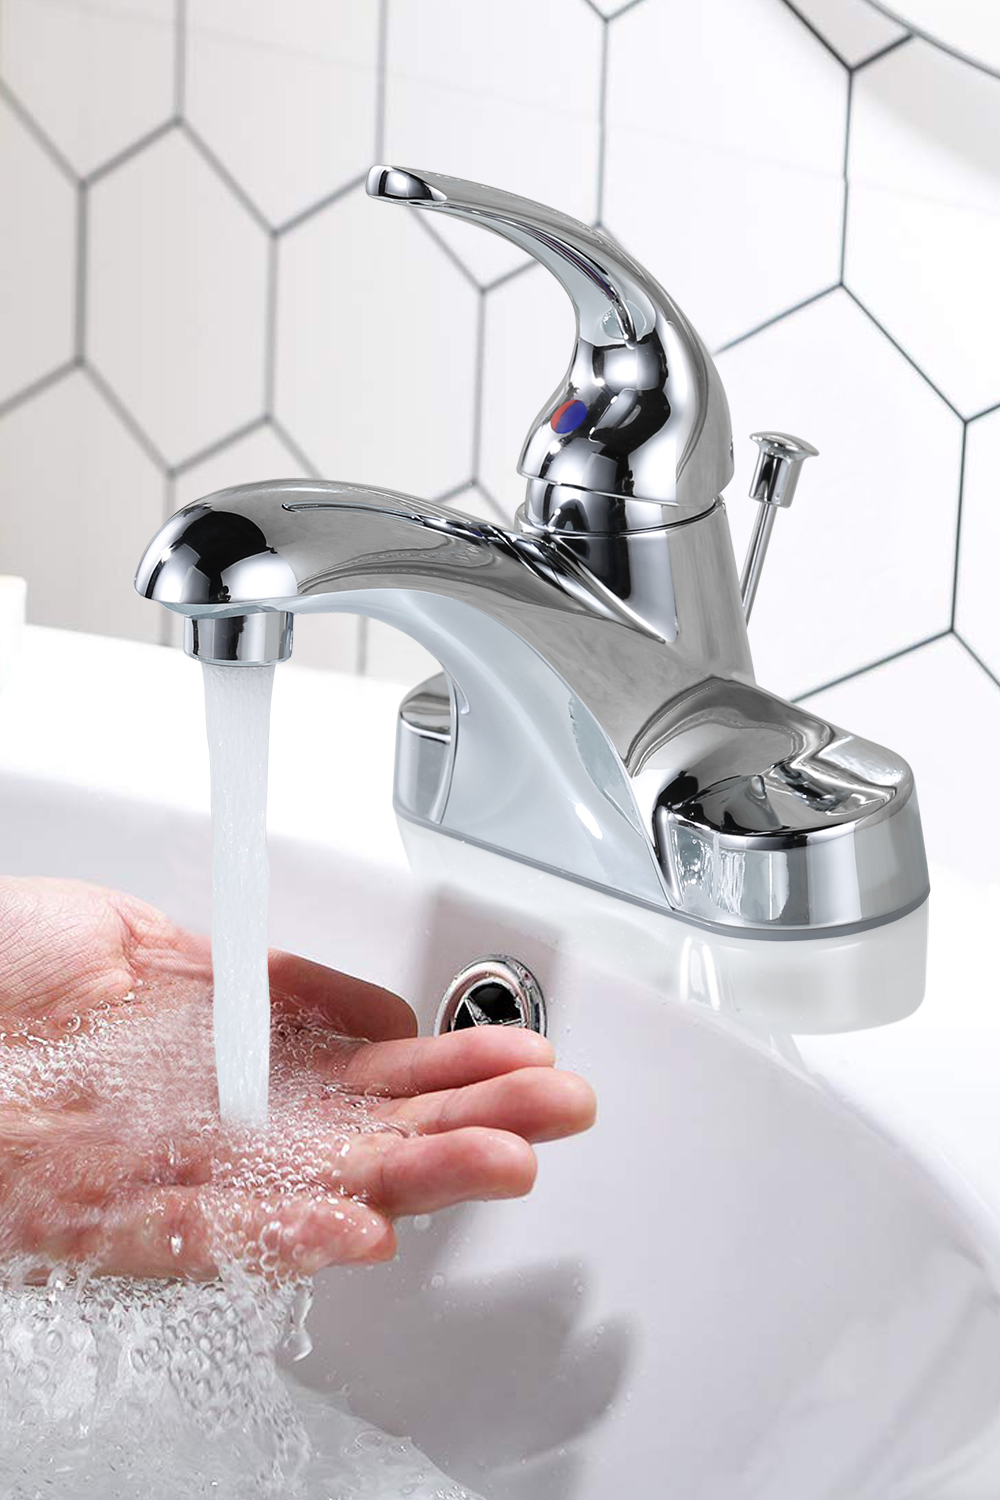 How to install different faucets